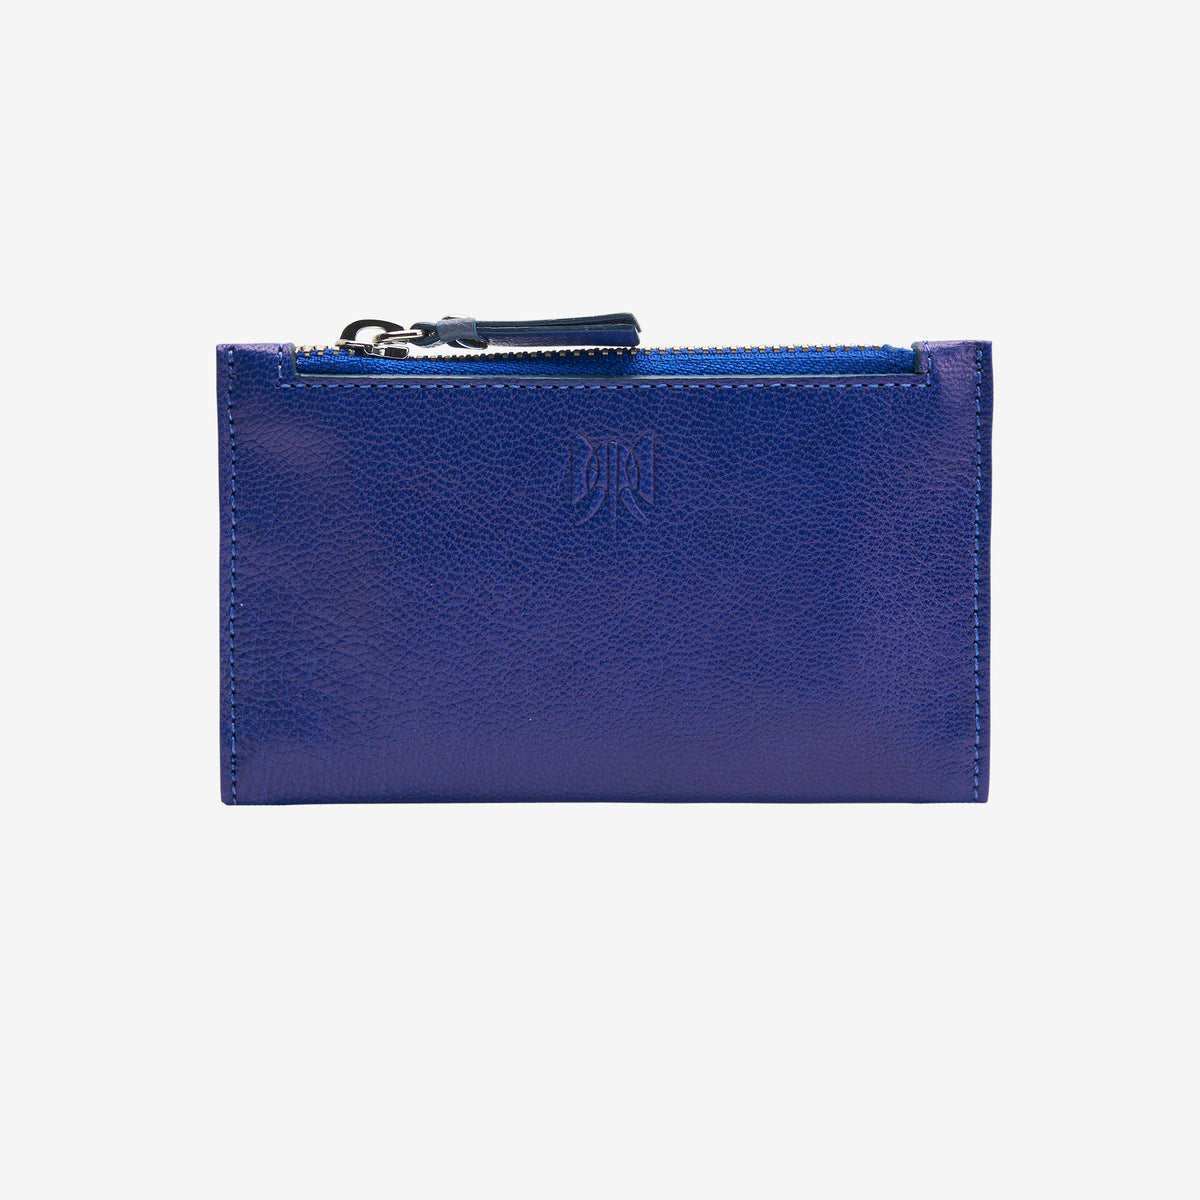     tusk-383-leather-slim-card-case-with-zip-coin-pocket-indigo-and-french-blue-front